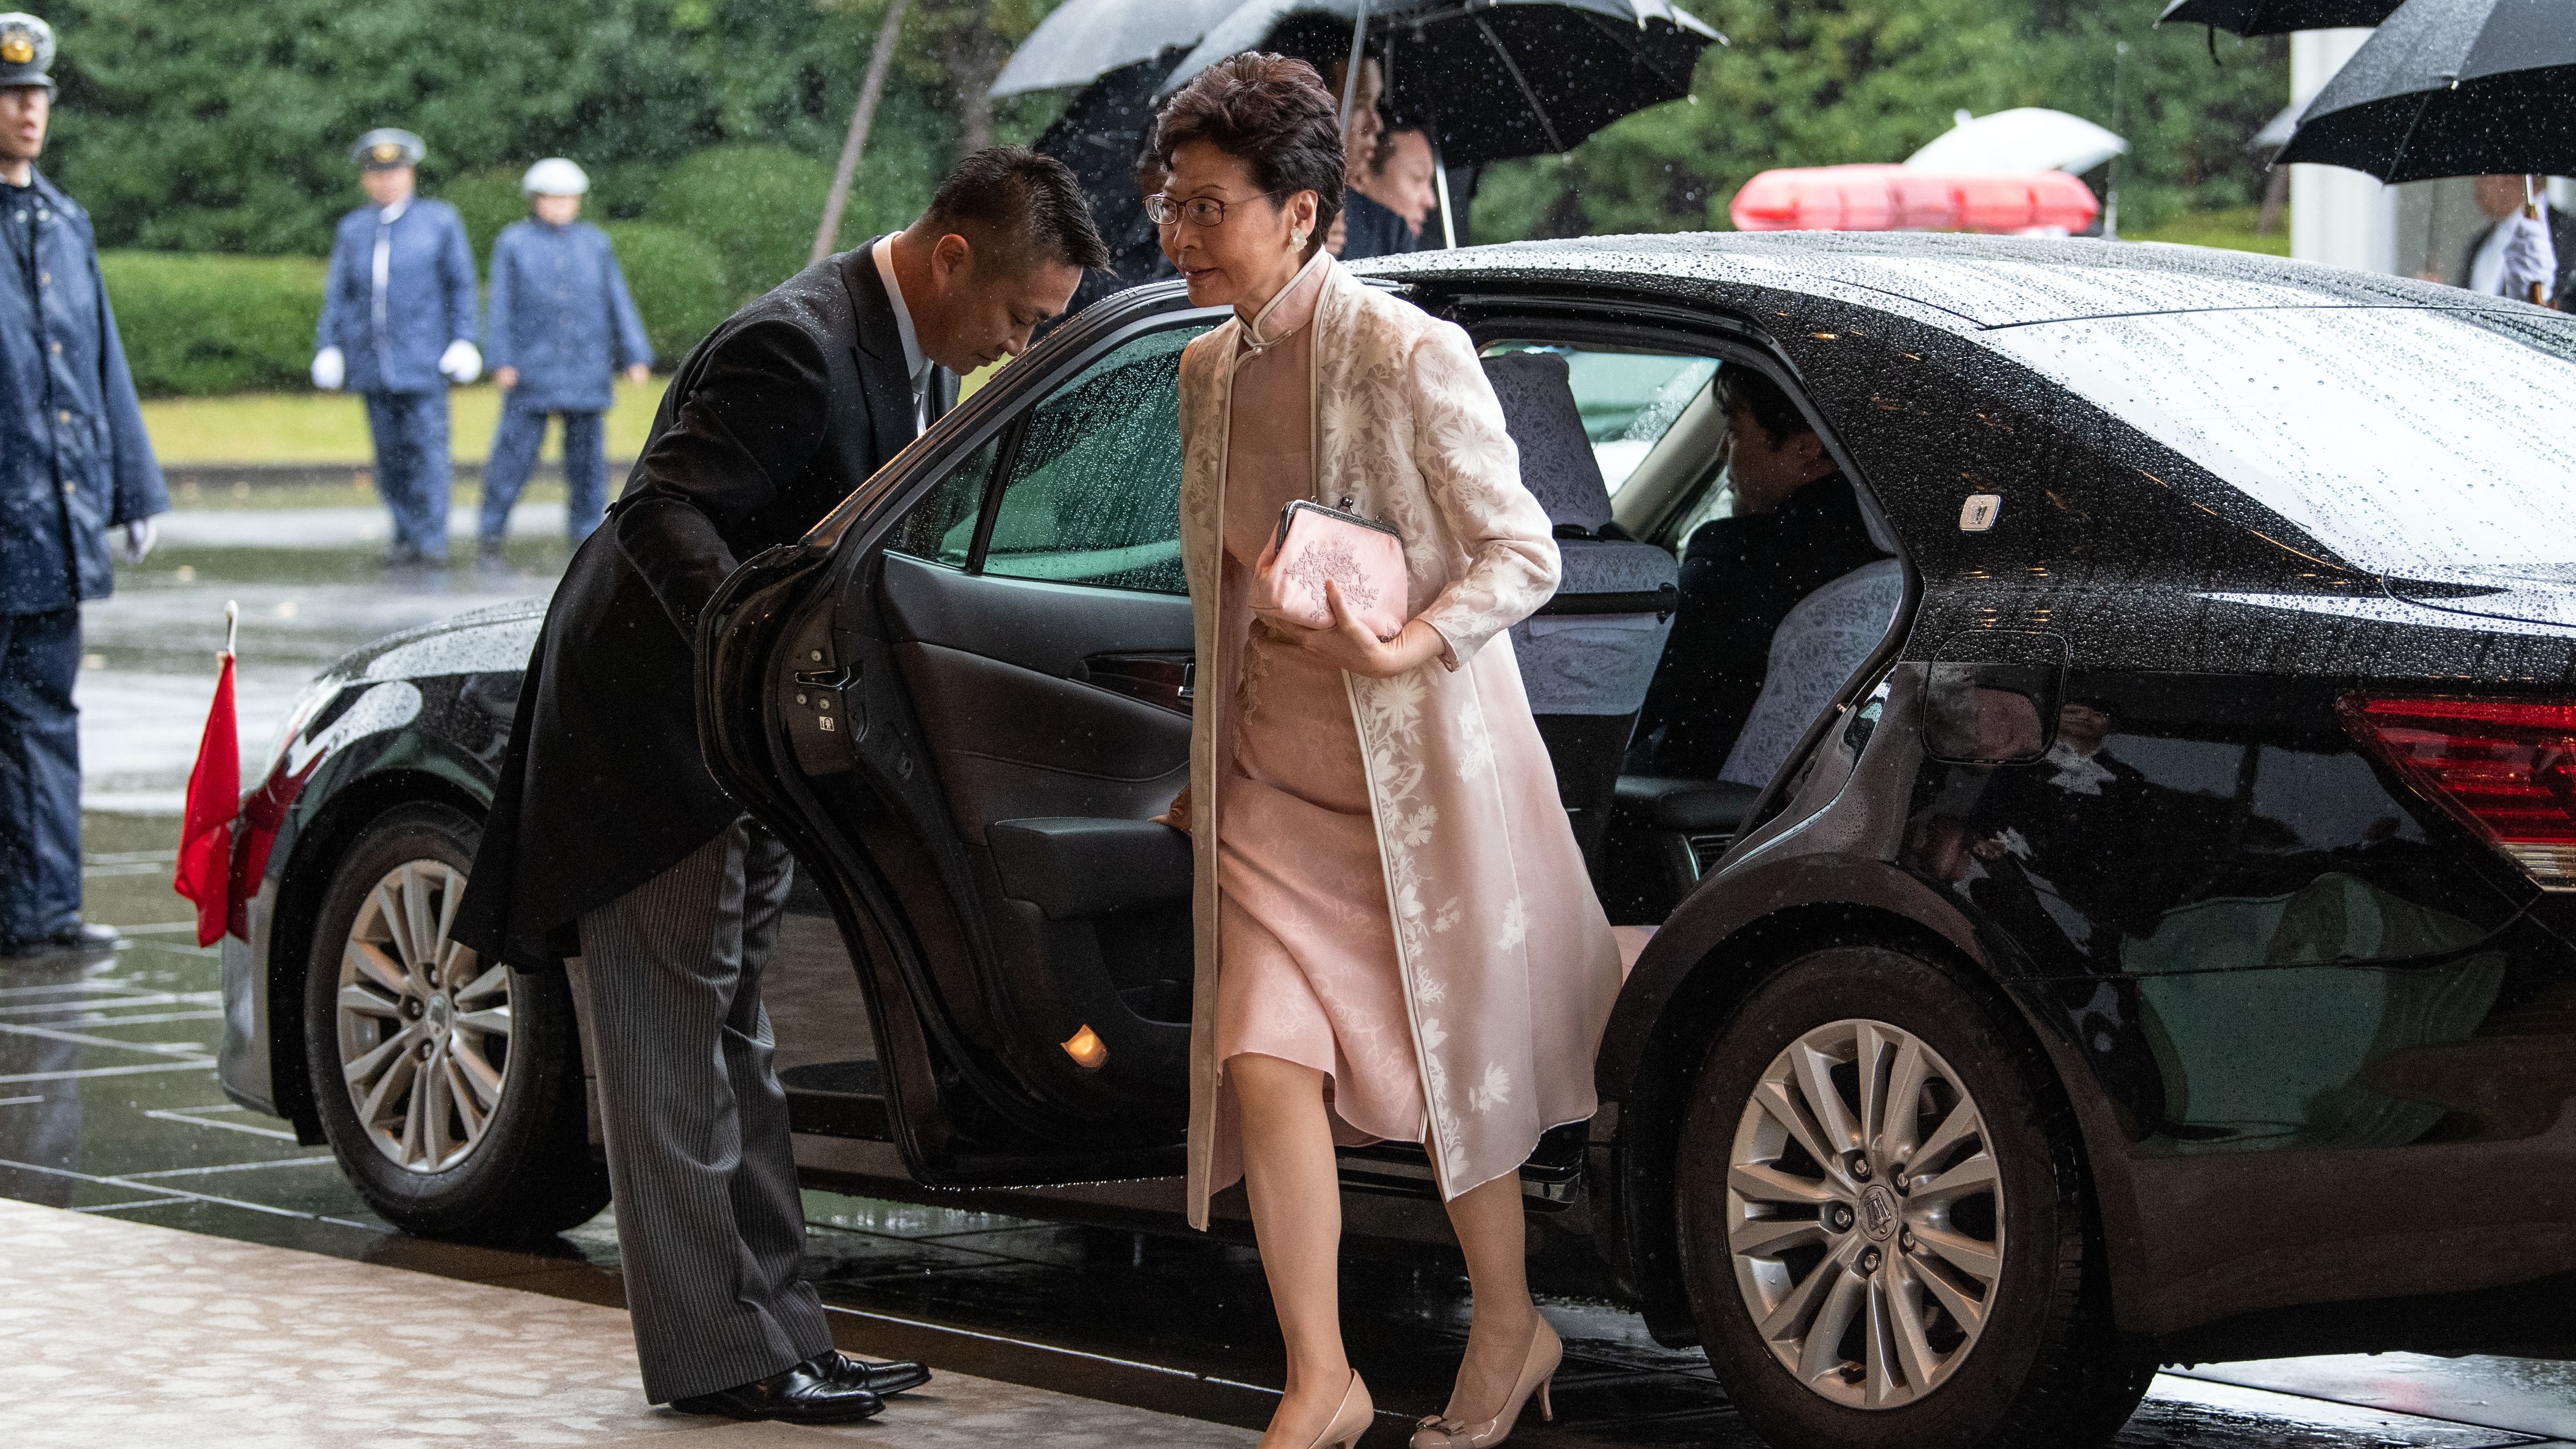 Chief Executive of Hong Kong Carrie Lam arrives at Emperor Naruhito's enthronement ceremony. 